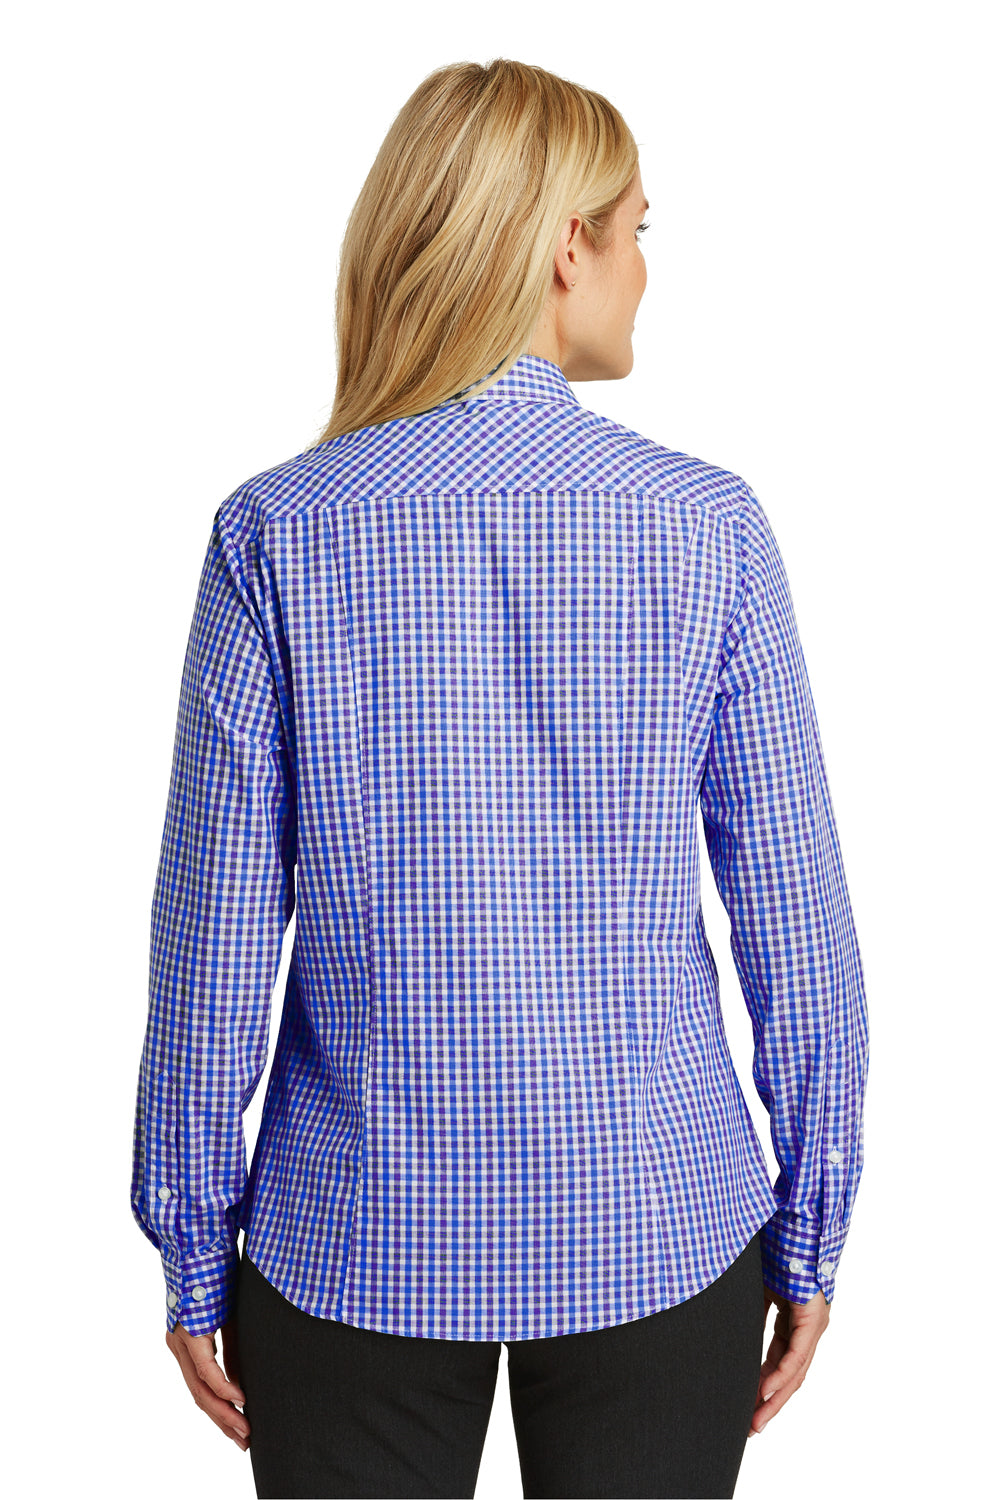 Port Authority L654 Womens Easy Care Wrinkle Resistant Long Sleeve Button Down Shirt Blue/Purple Back